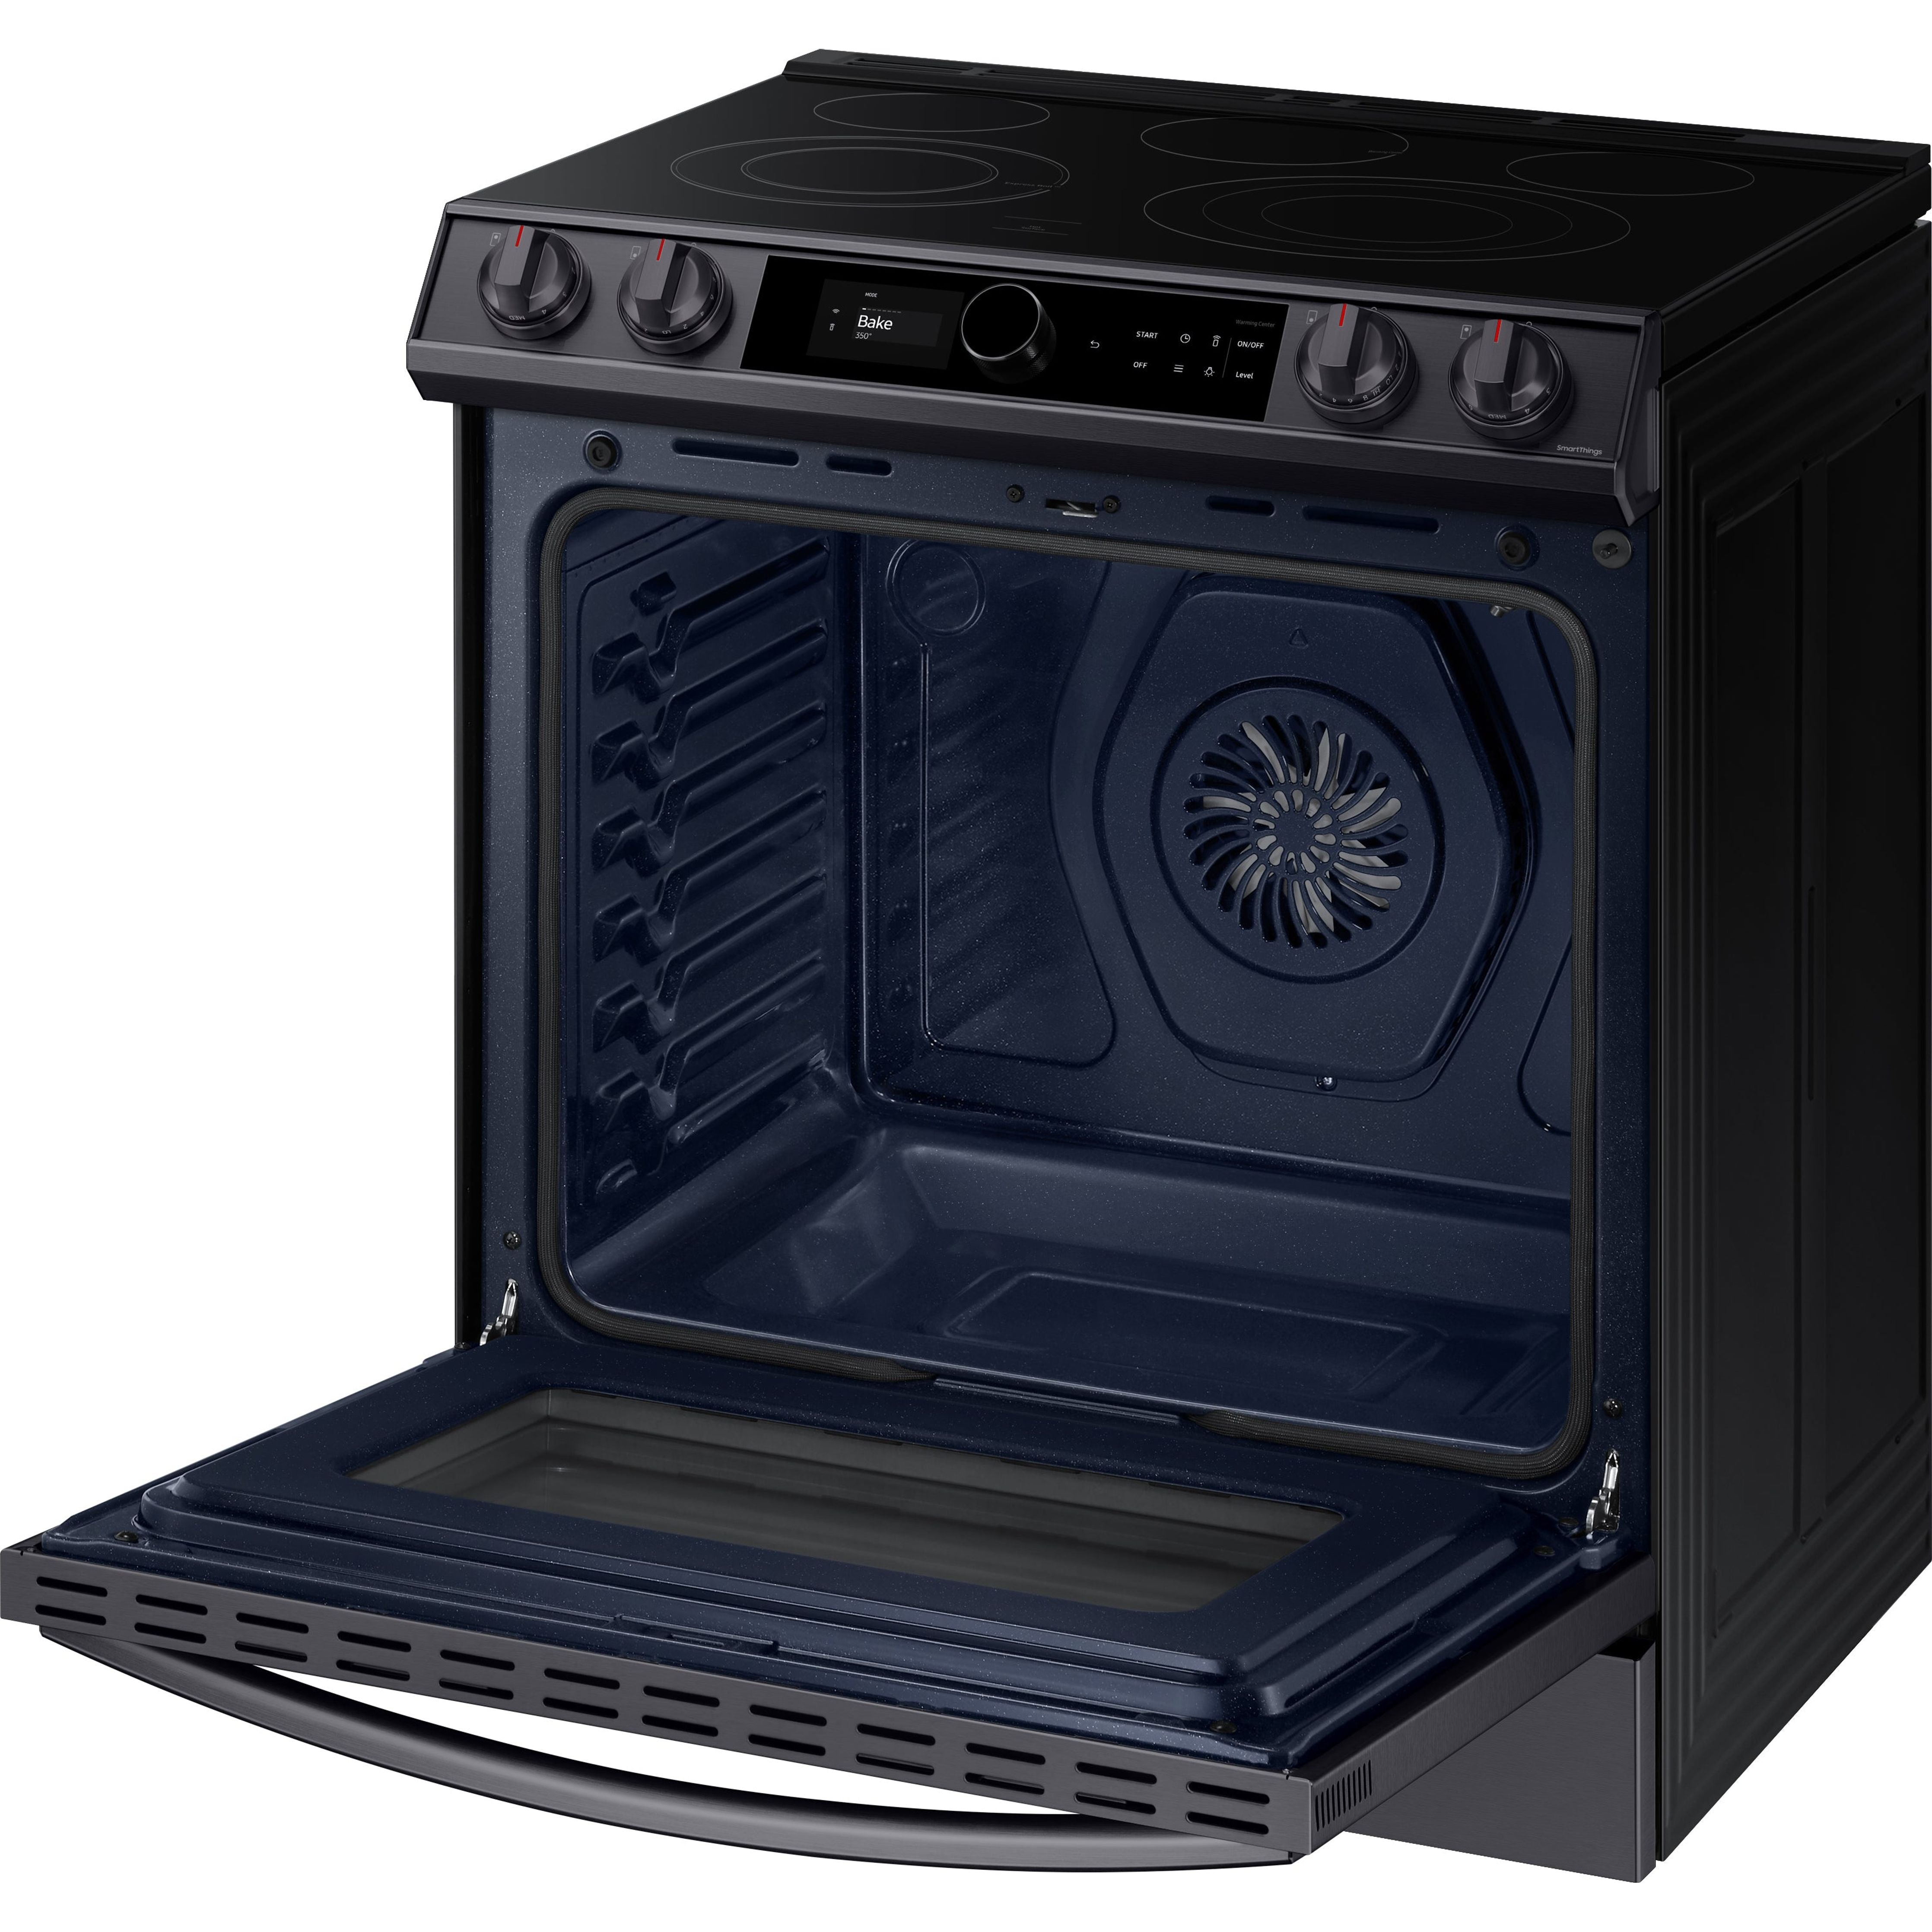 Samsung 30" 6.3 cu.ft. Smart Electric Slide-in True Convection Range w/ Smart Dial & Air Fry